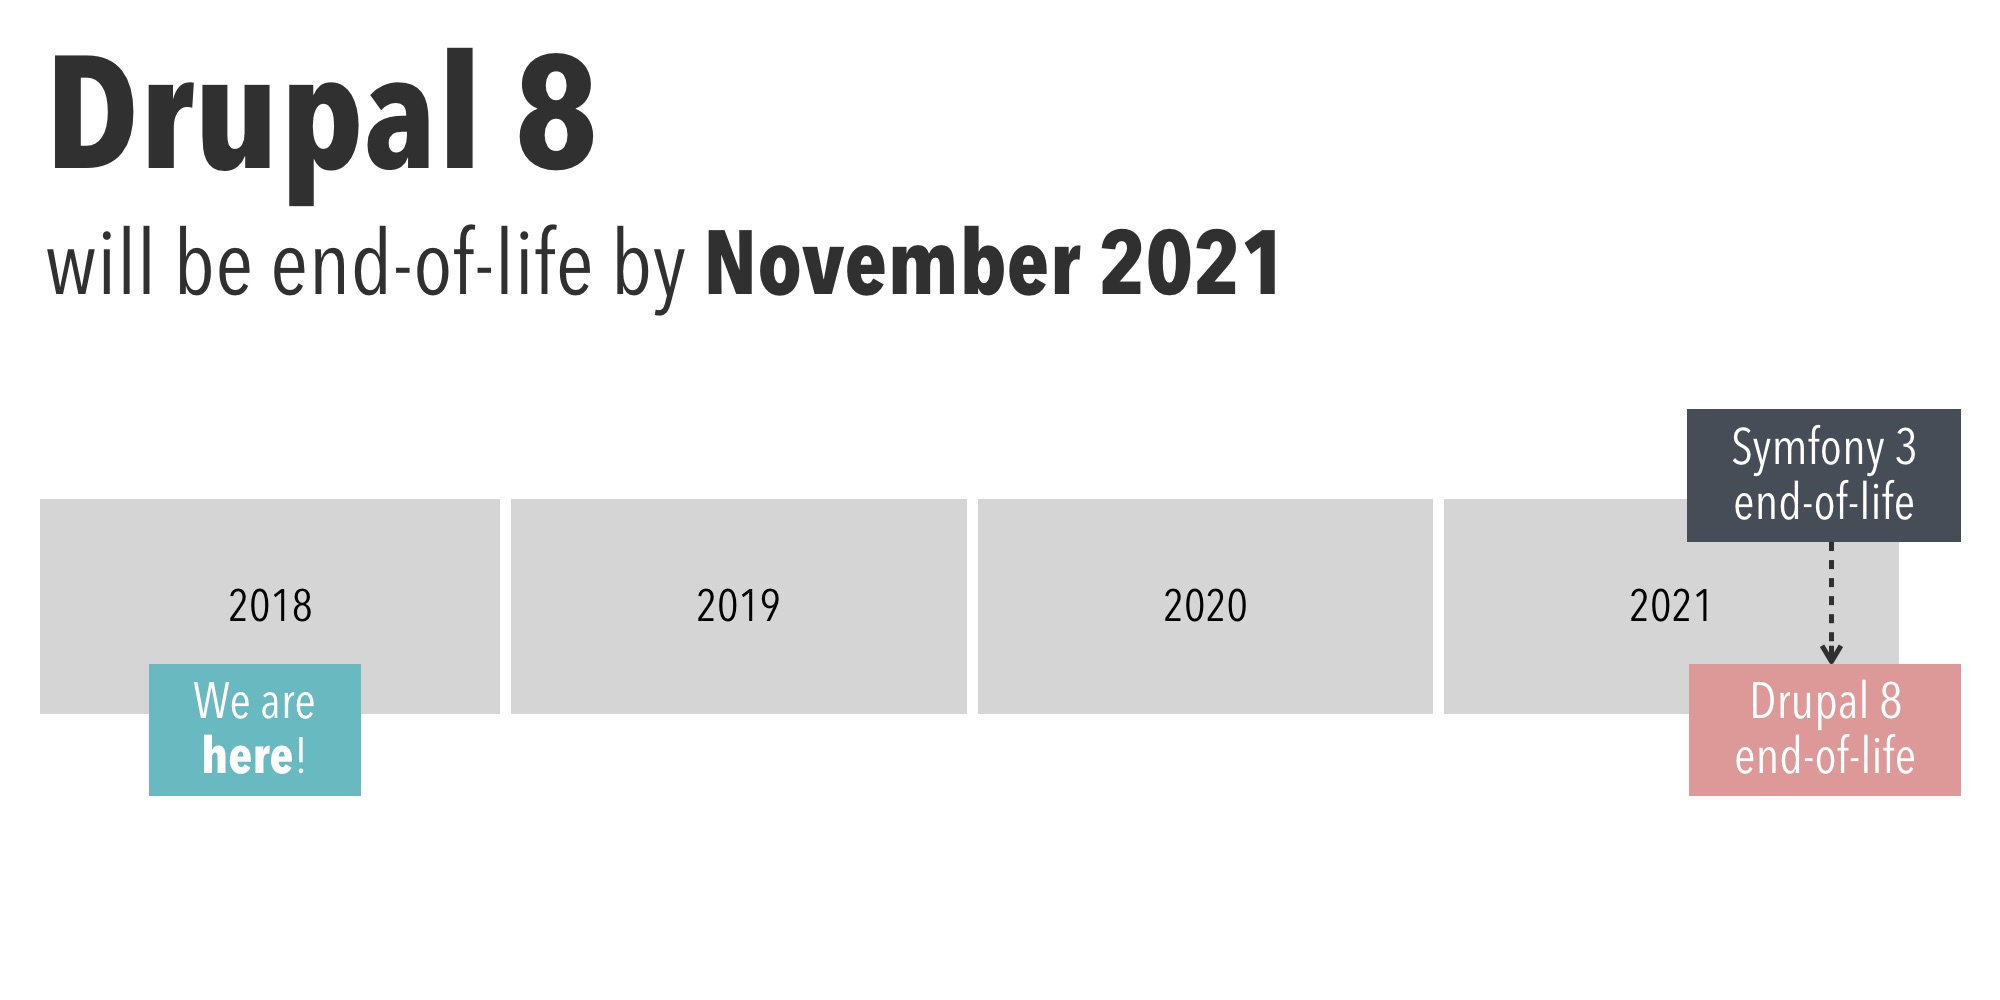 Drupal 8 will be end-of-life by November 2021